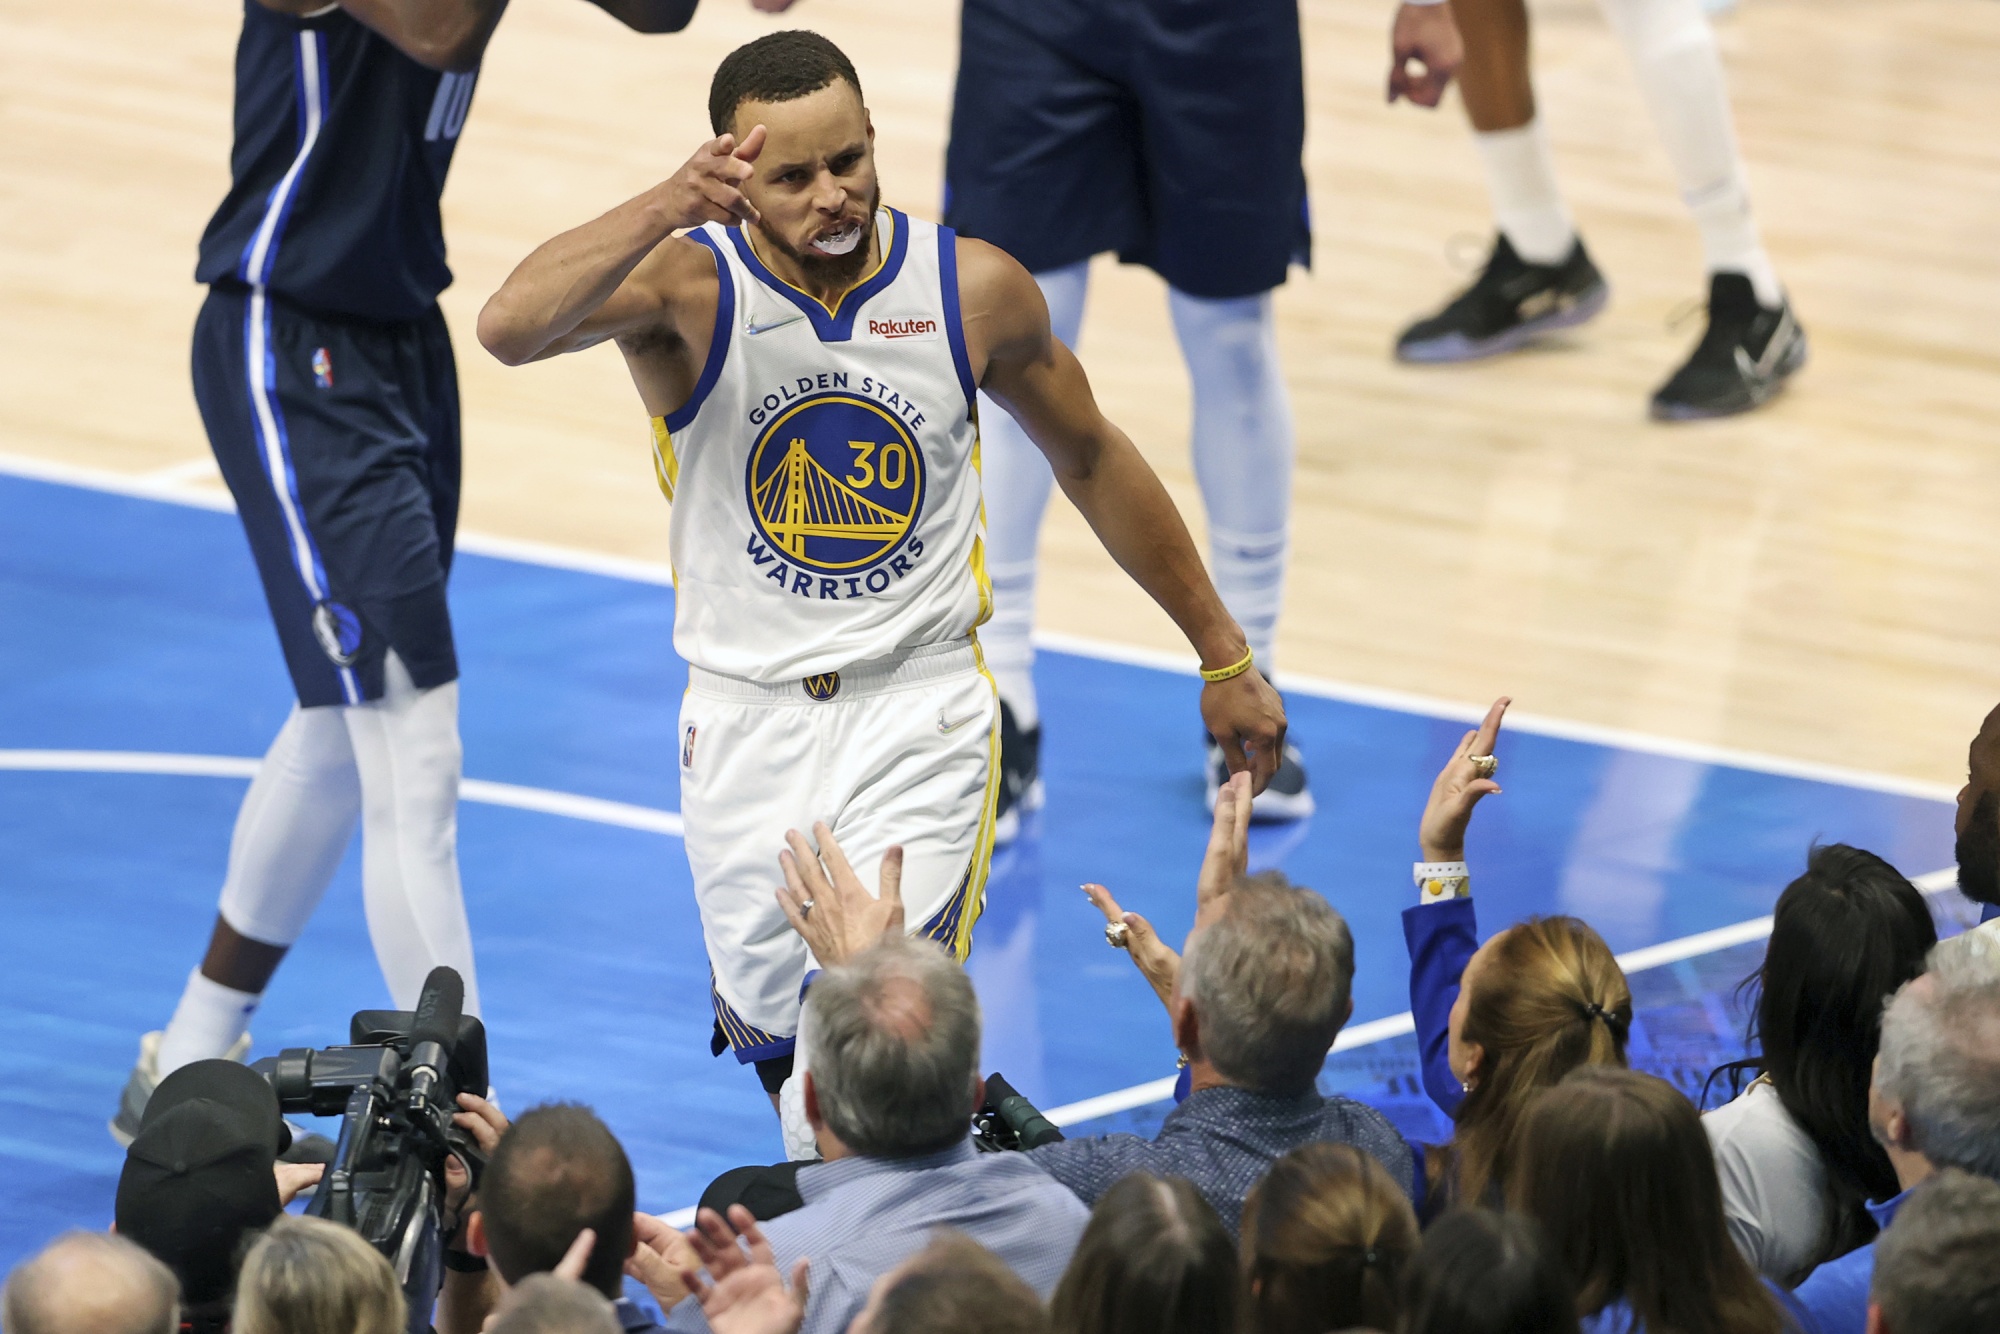 NBA Western Conference guide: Warriors have tough road to repeat